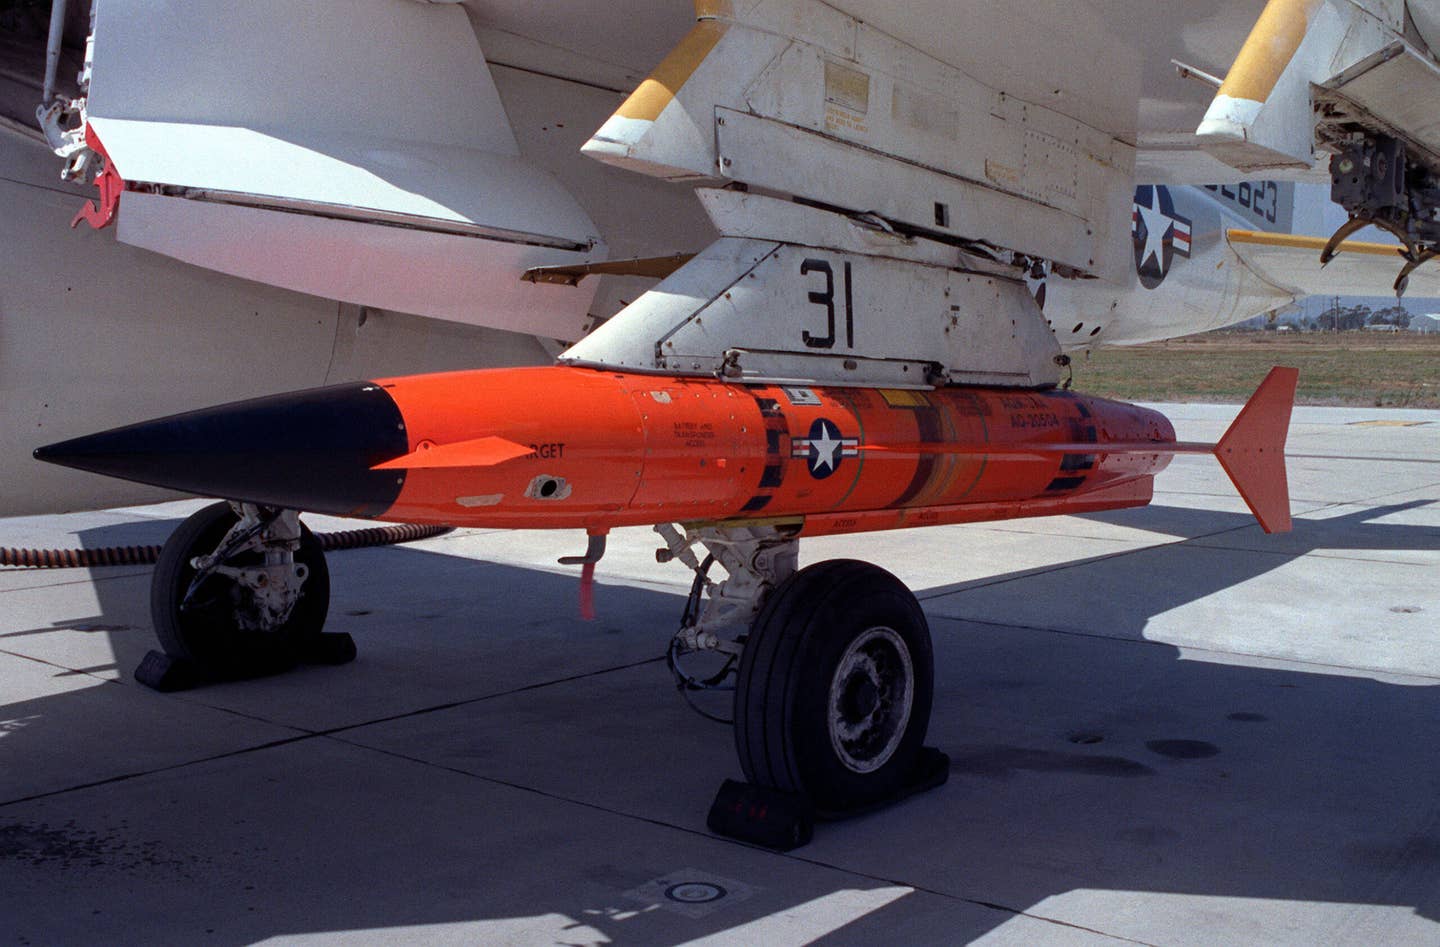 A view of an AQM-37A target after it is loaded onto the wing of an A-6E Intruder aircraft at the Pacific Missile Test Center. <em>Credit: U.S. Navy</em>